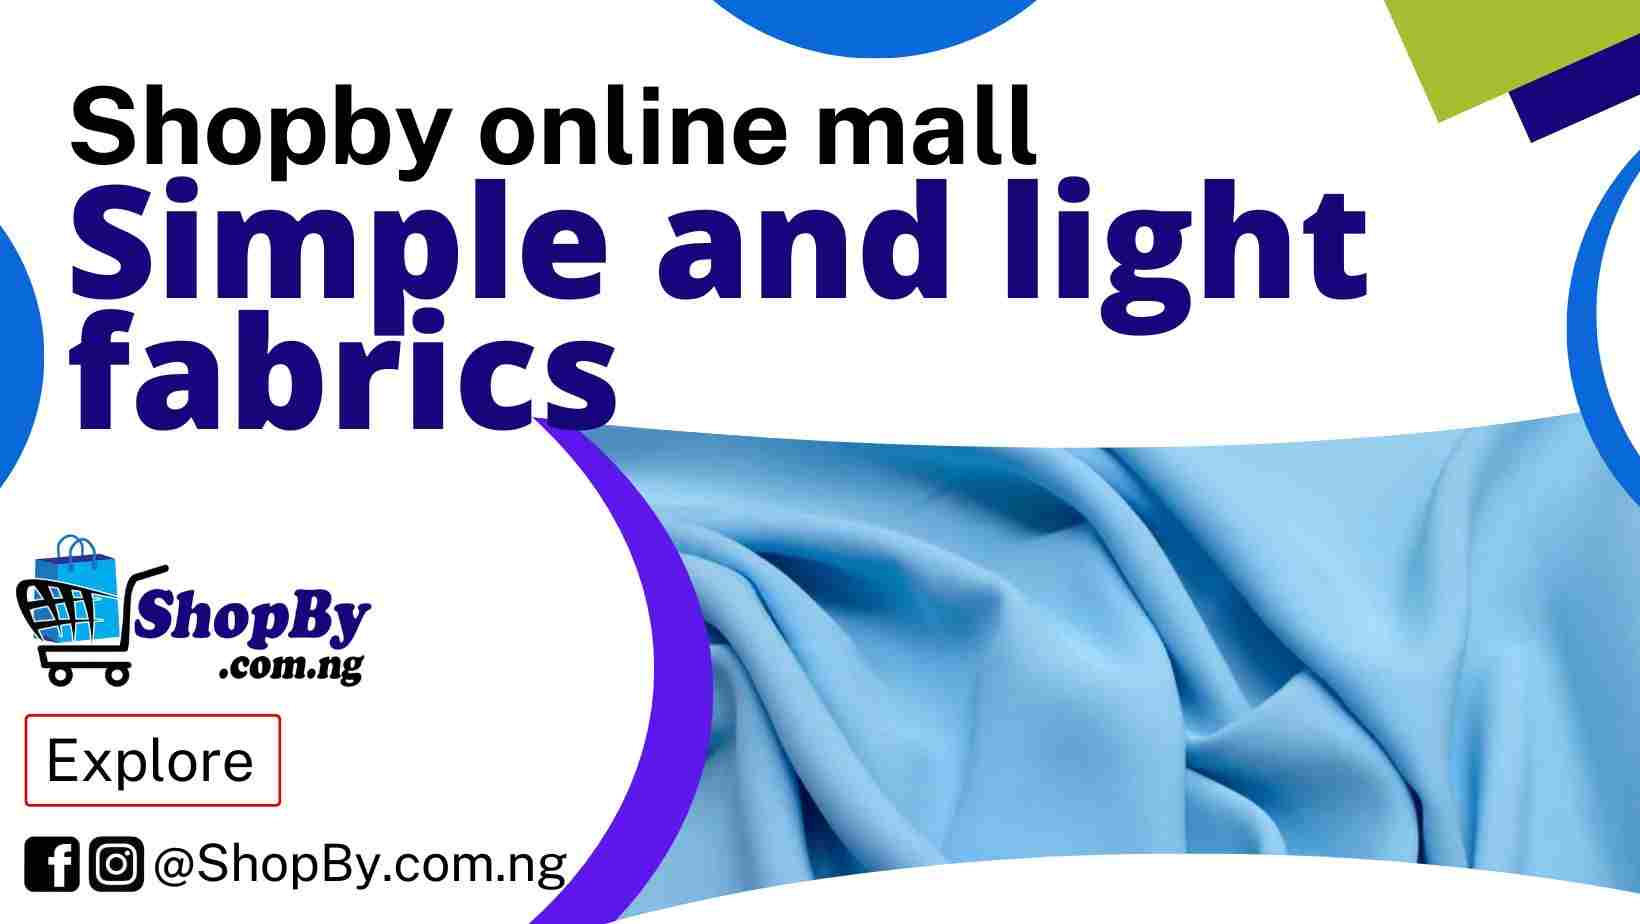 Shopby online mall simple and light fabrics